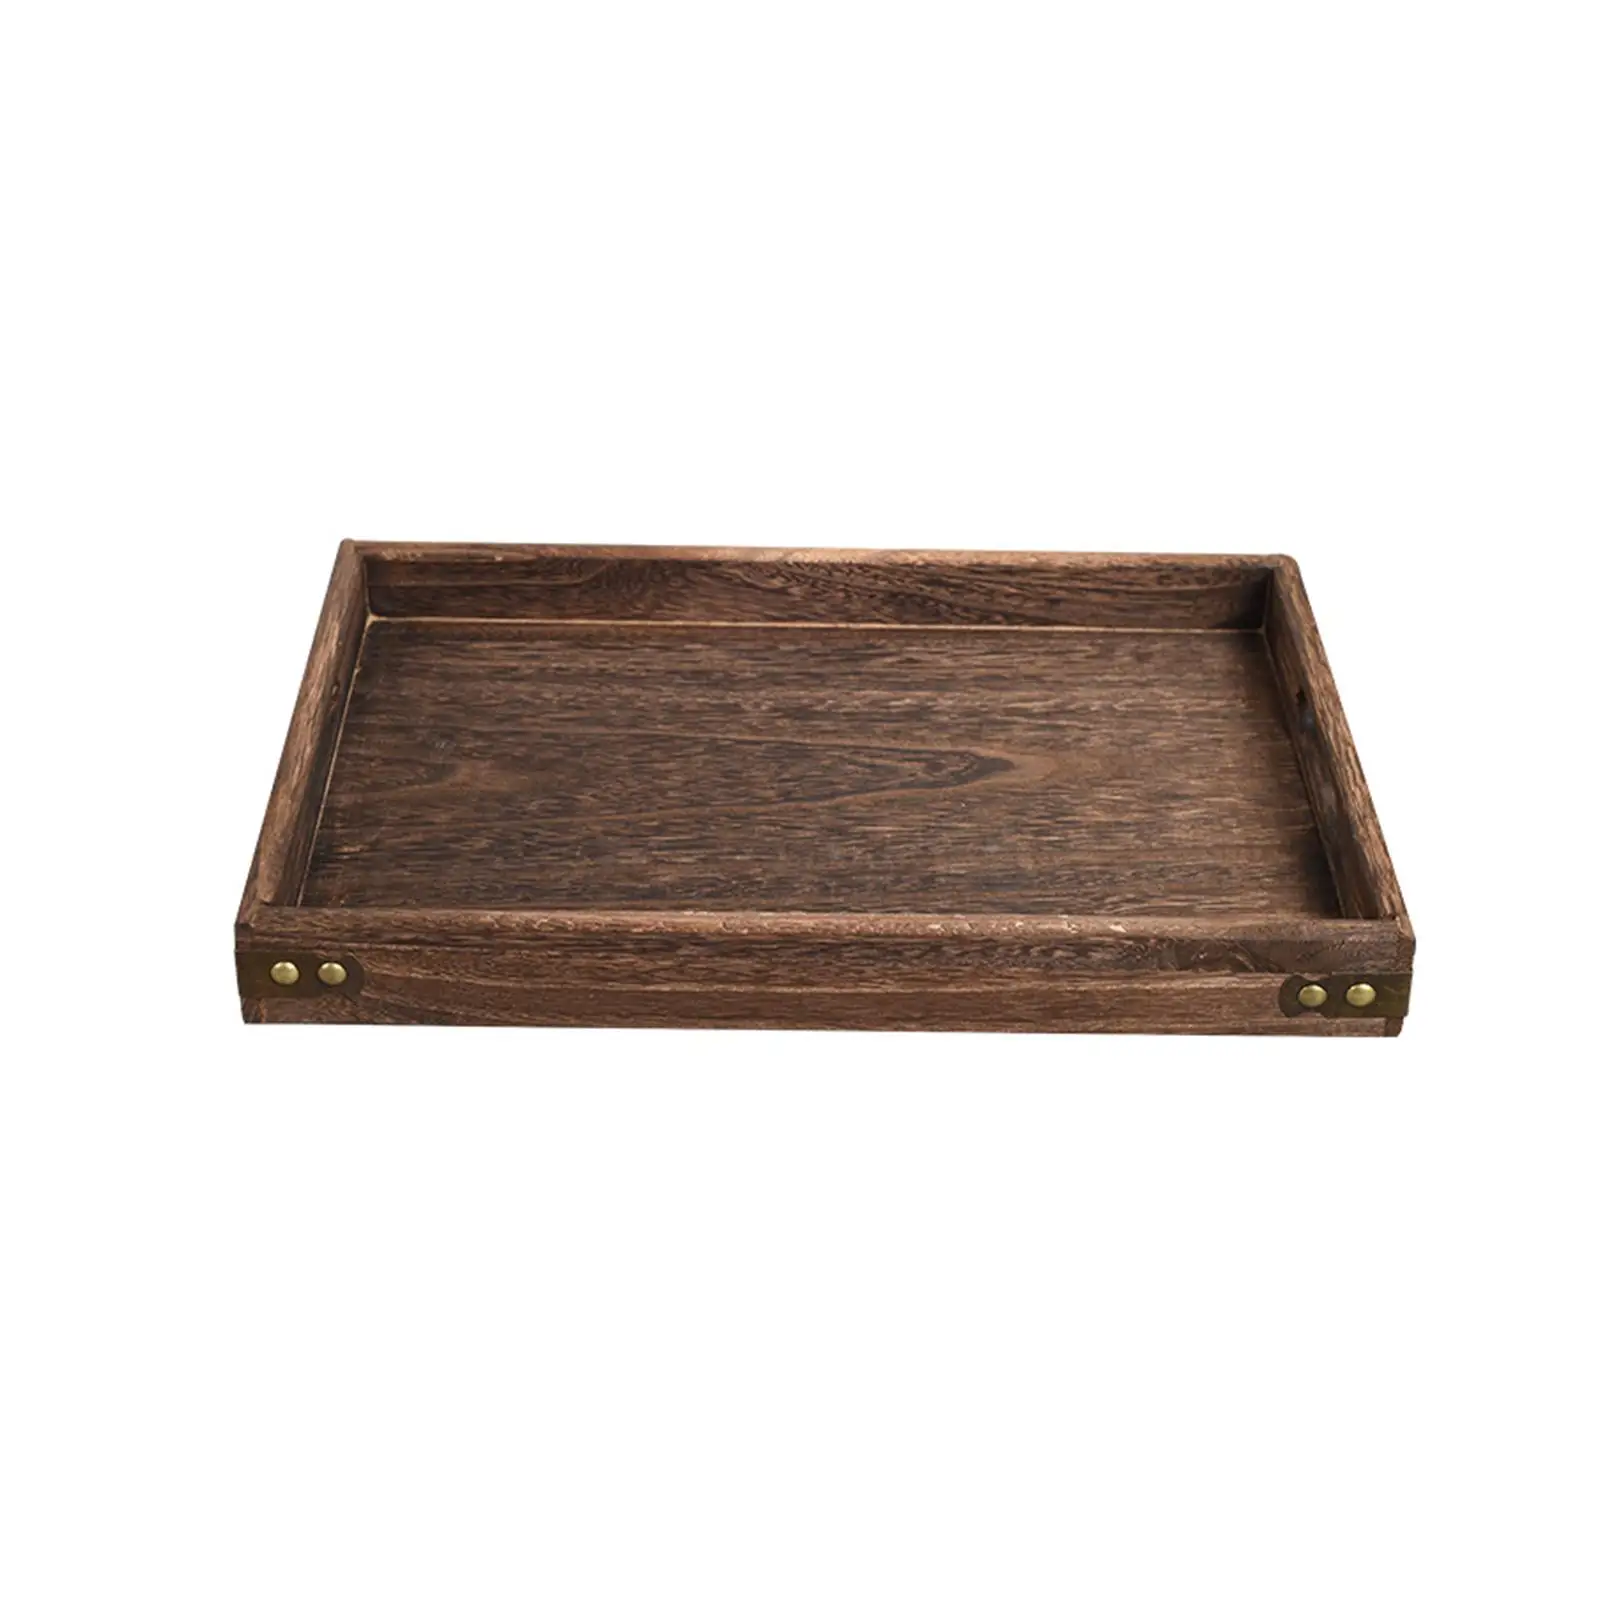 Wooden Serving Tray with Hollow Handle Eating Tray Practical for Living Room, Bathroom or Desk Drawer Multifunctional Decorative